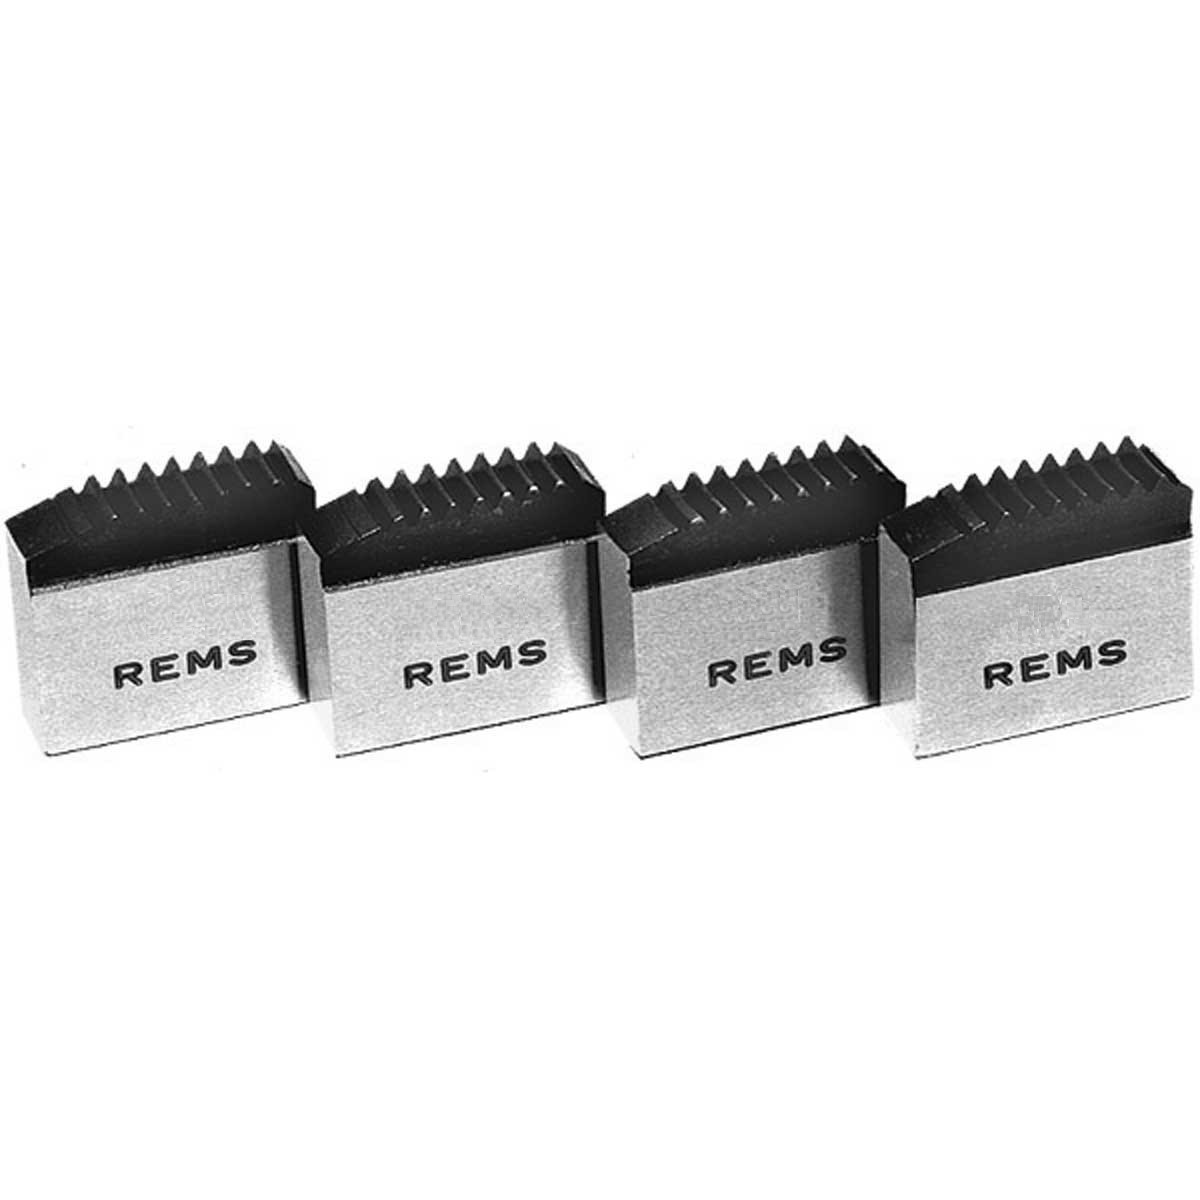 REMS - 1-1/4" Replacement Die Set, 521262